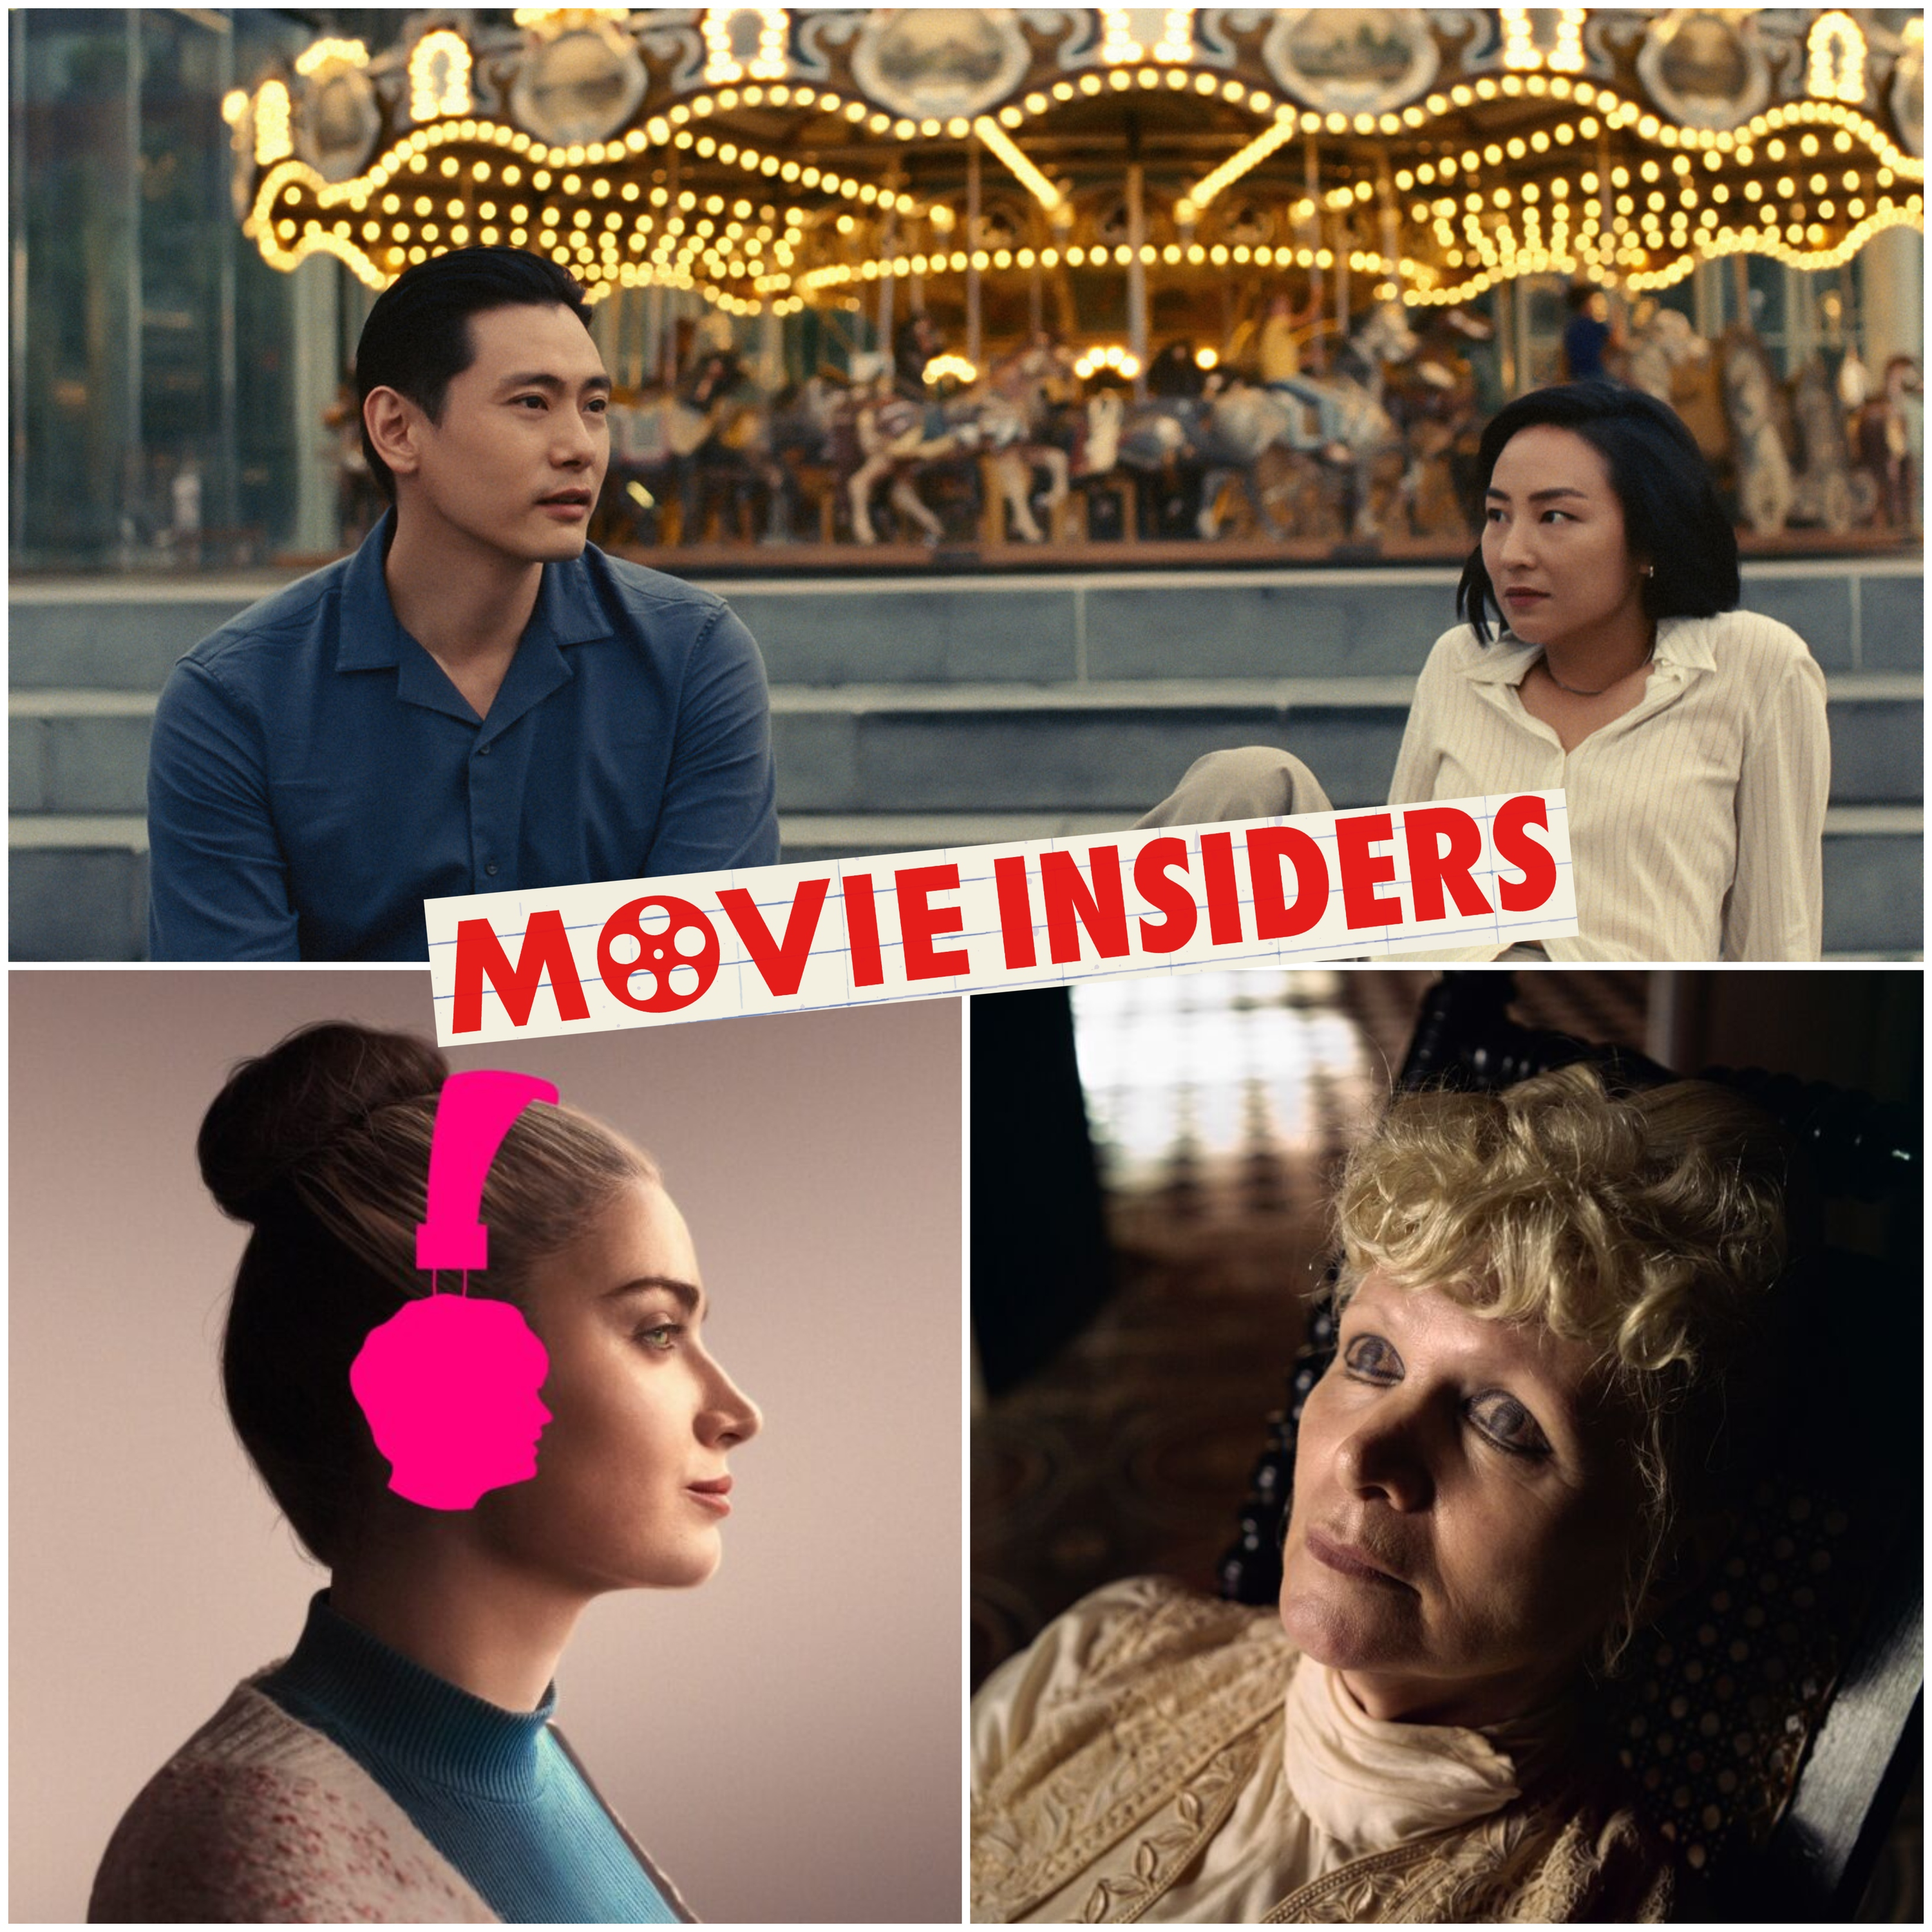 MovieInsiders 372: Sweet Dreams, The Creator, Past Lives, Flora and Son, Wes Anderson Roald Dahl shorts op Netflix